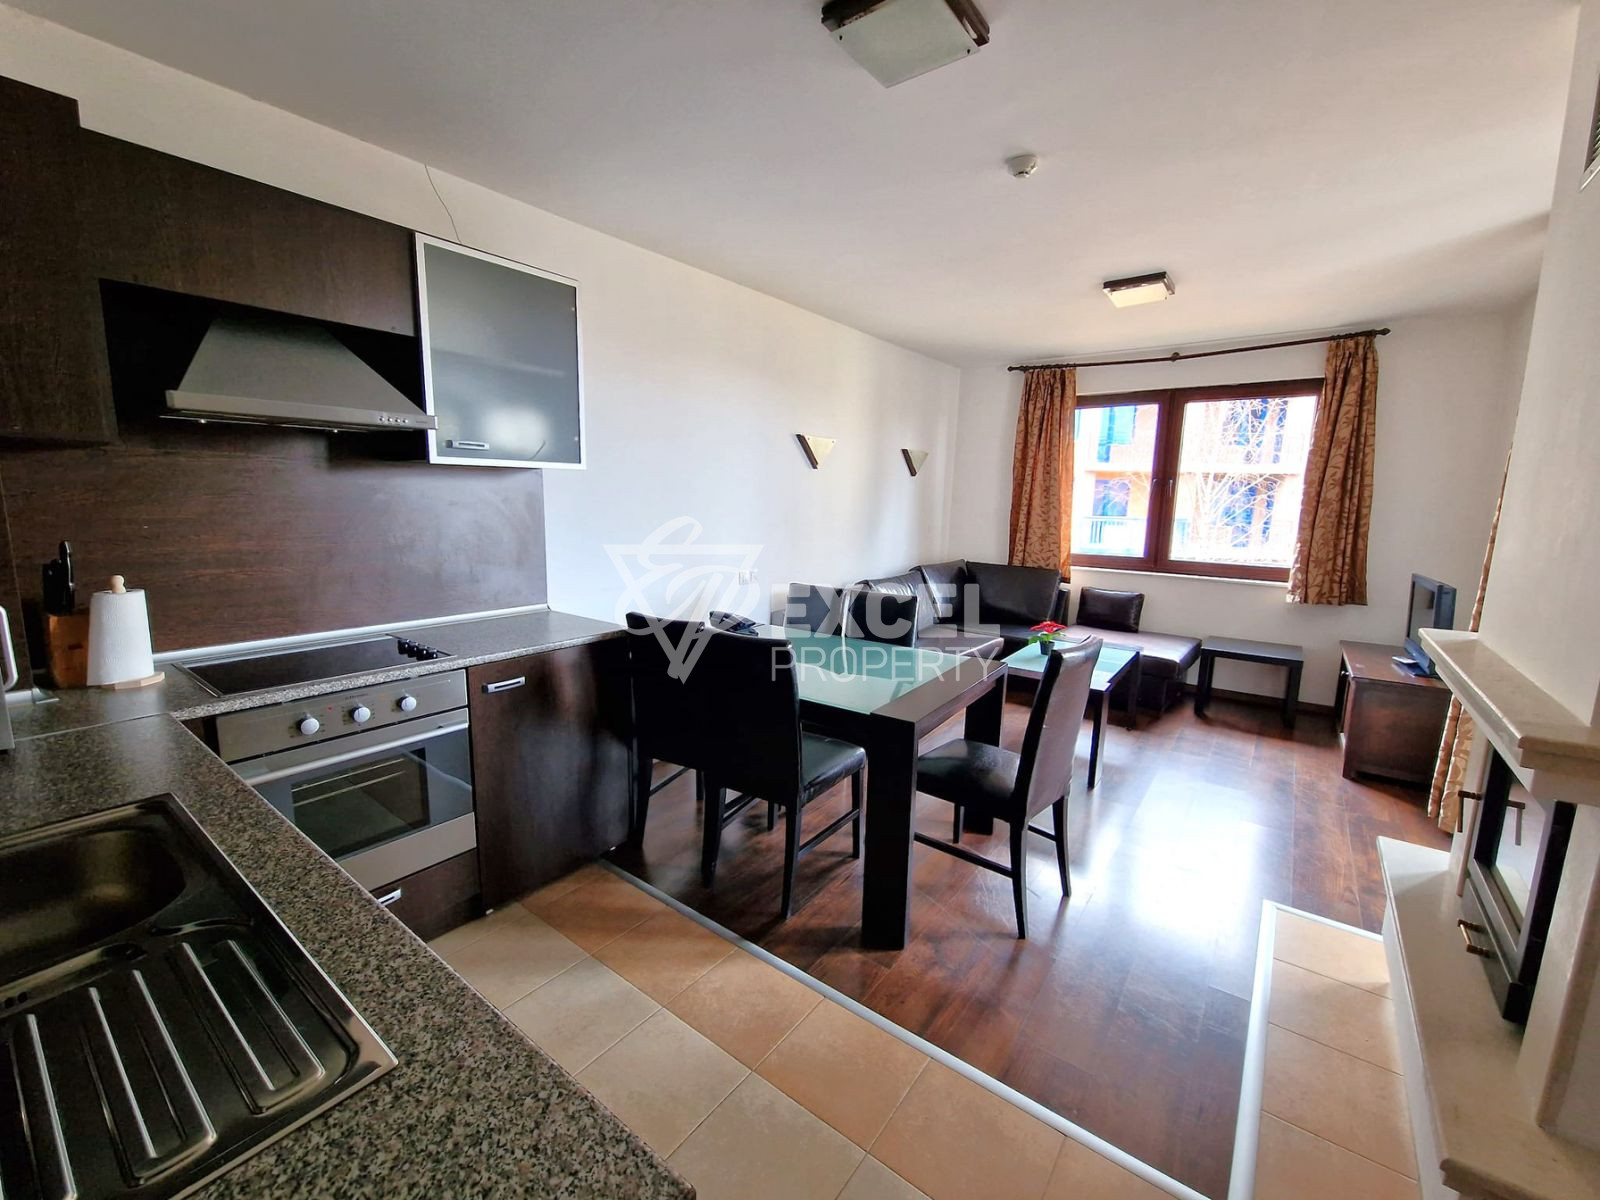 Two bedroom apartment with stunning Rila views in Winslow Infinity